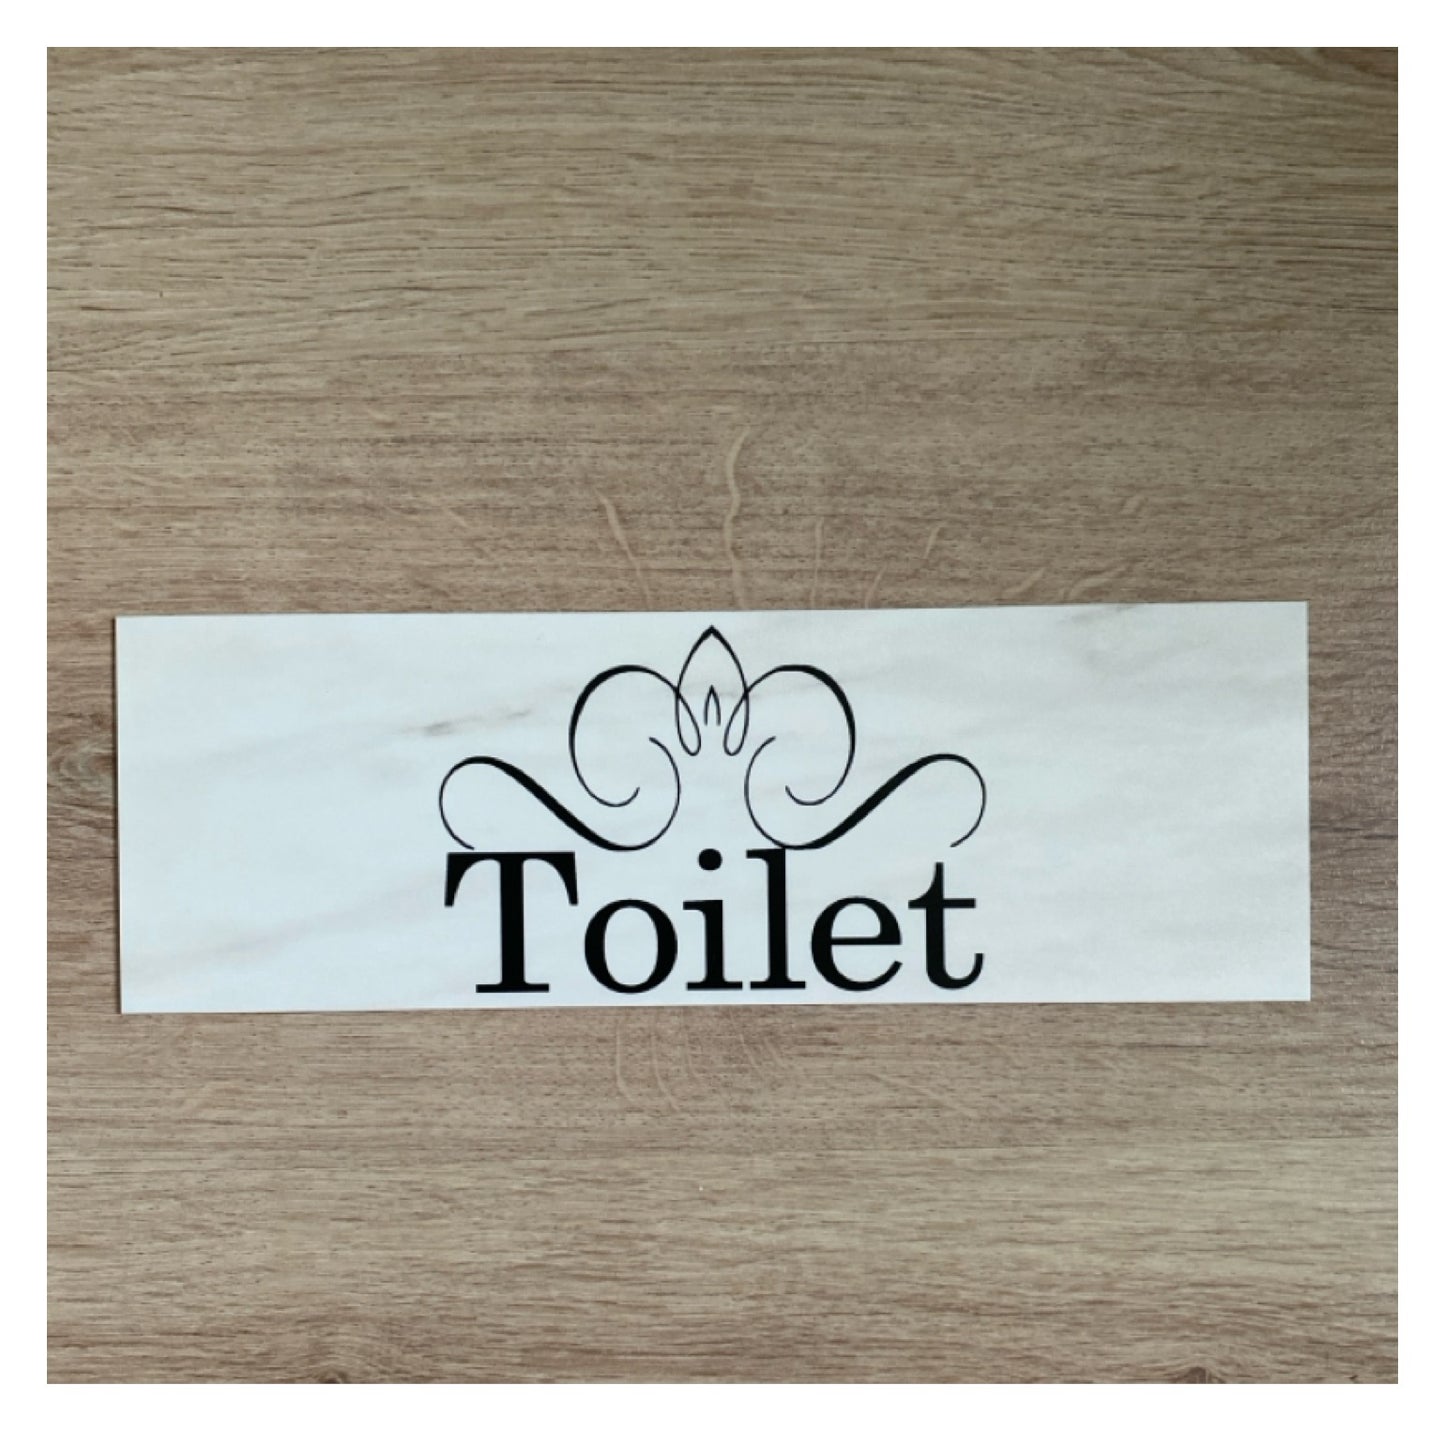 Toilet Laundry Bathroom Shabby Door Room Sign - The Renmy Store Homewares & Gifts 